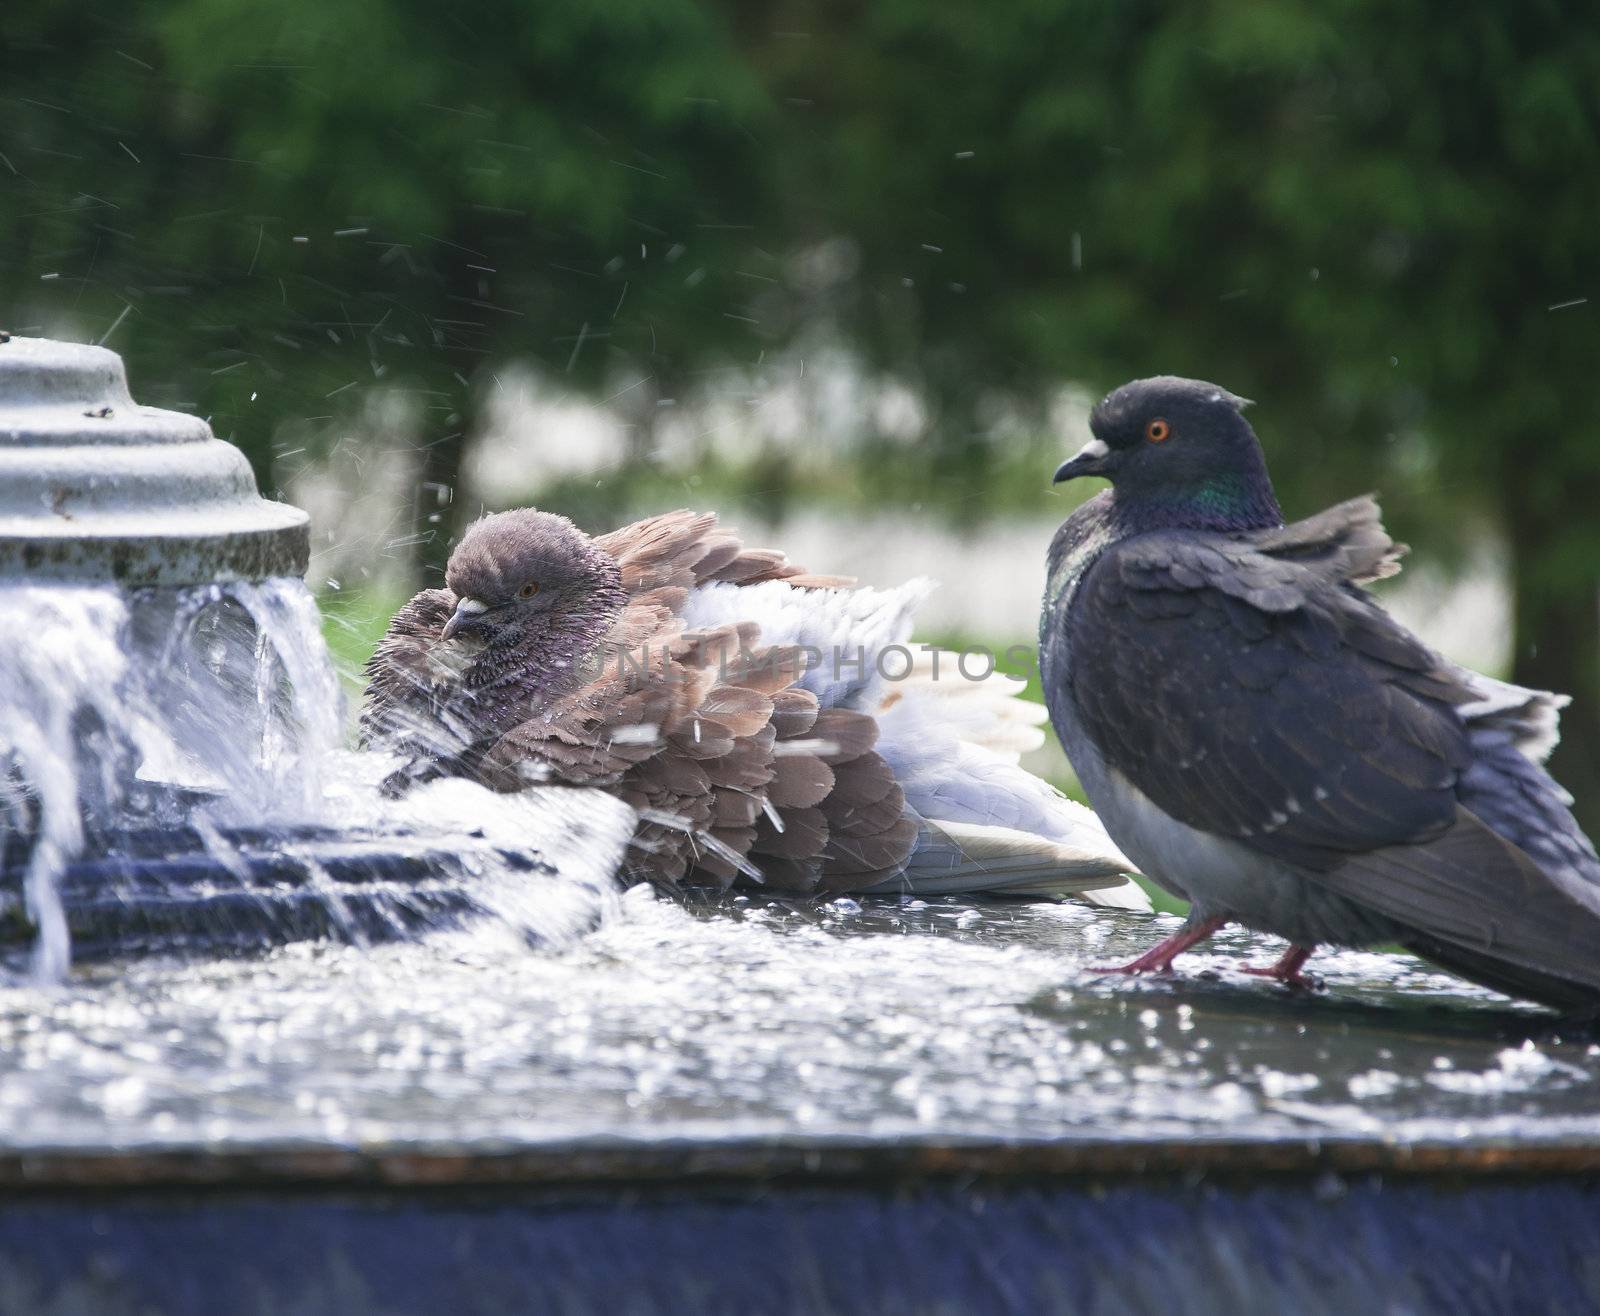 pigeons in city fountain bathe in pure water